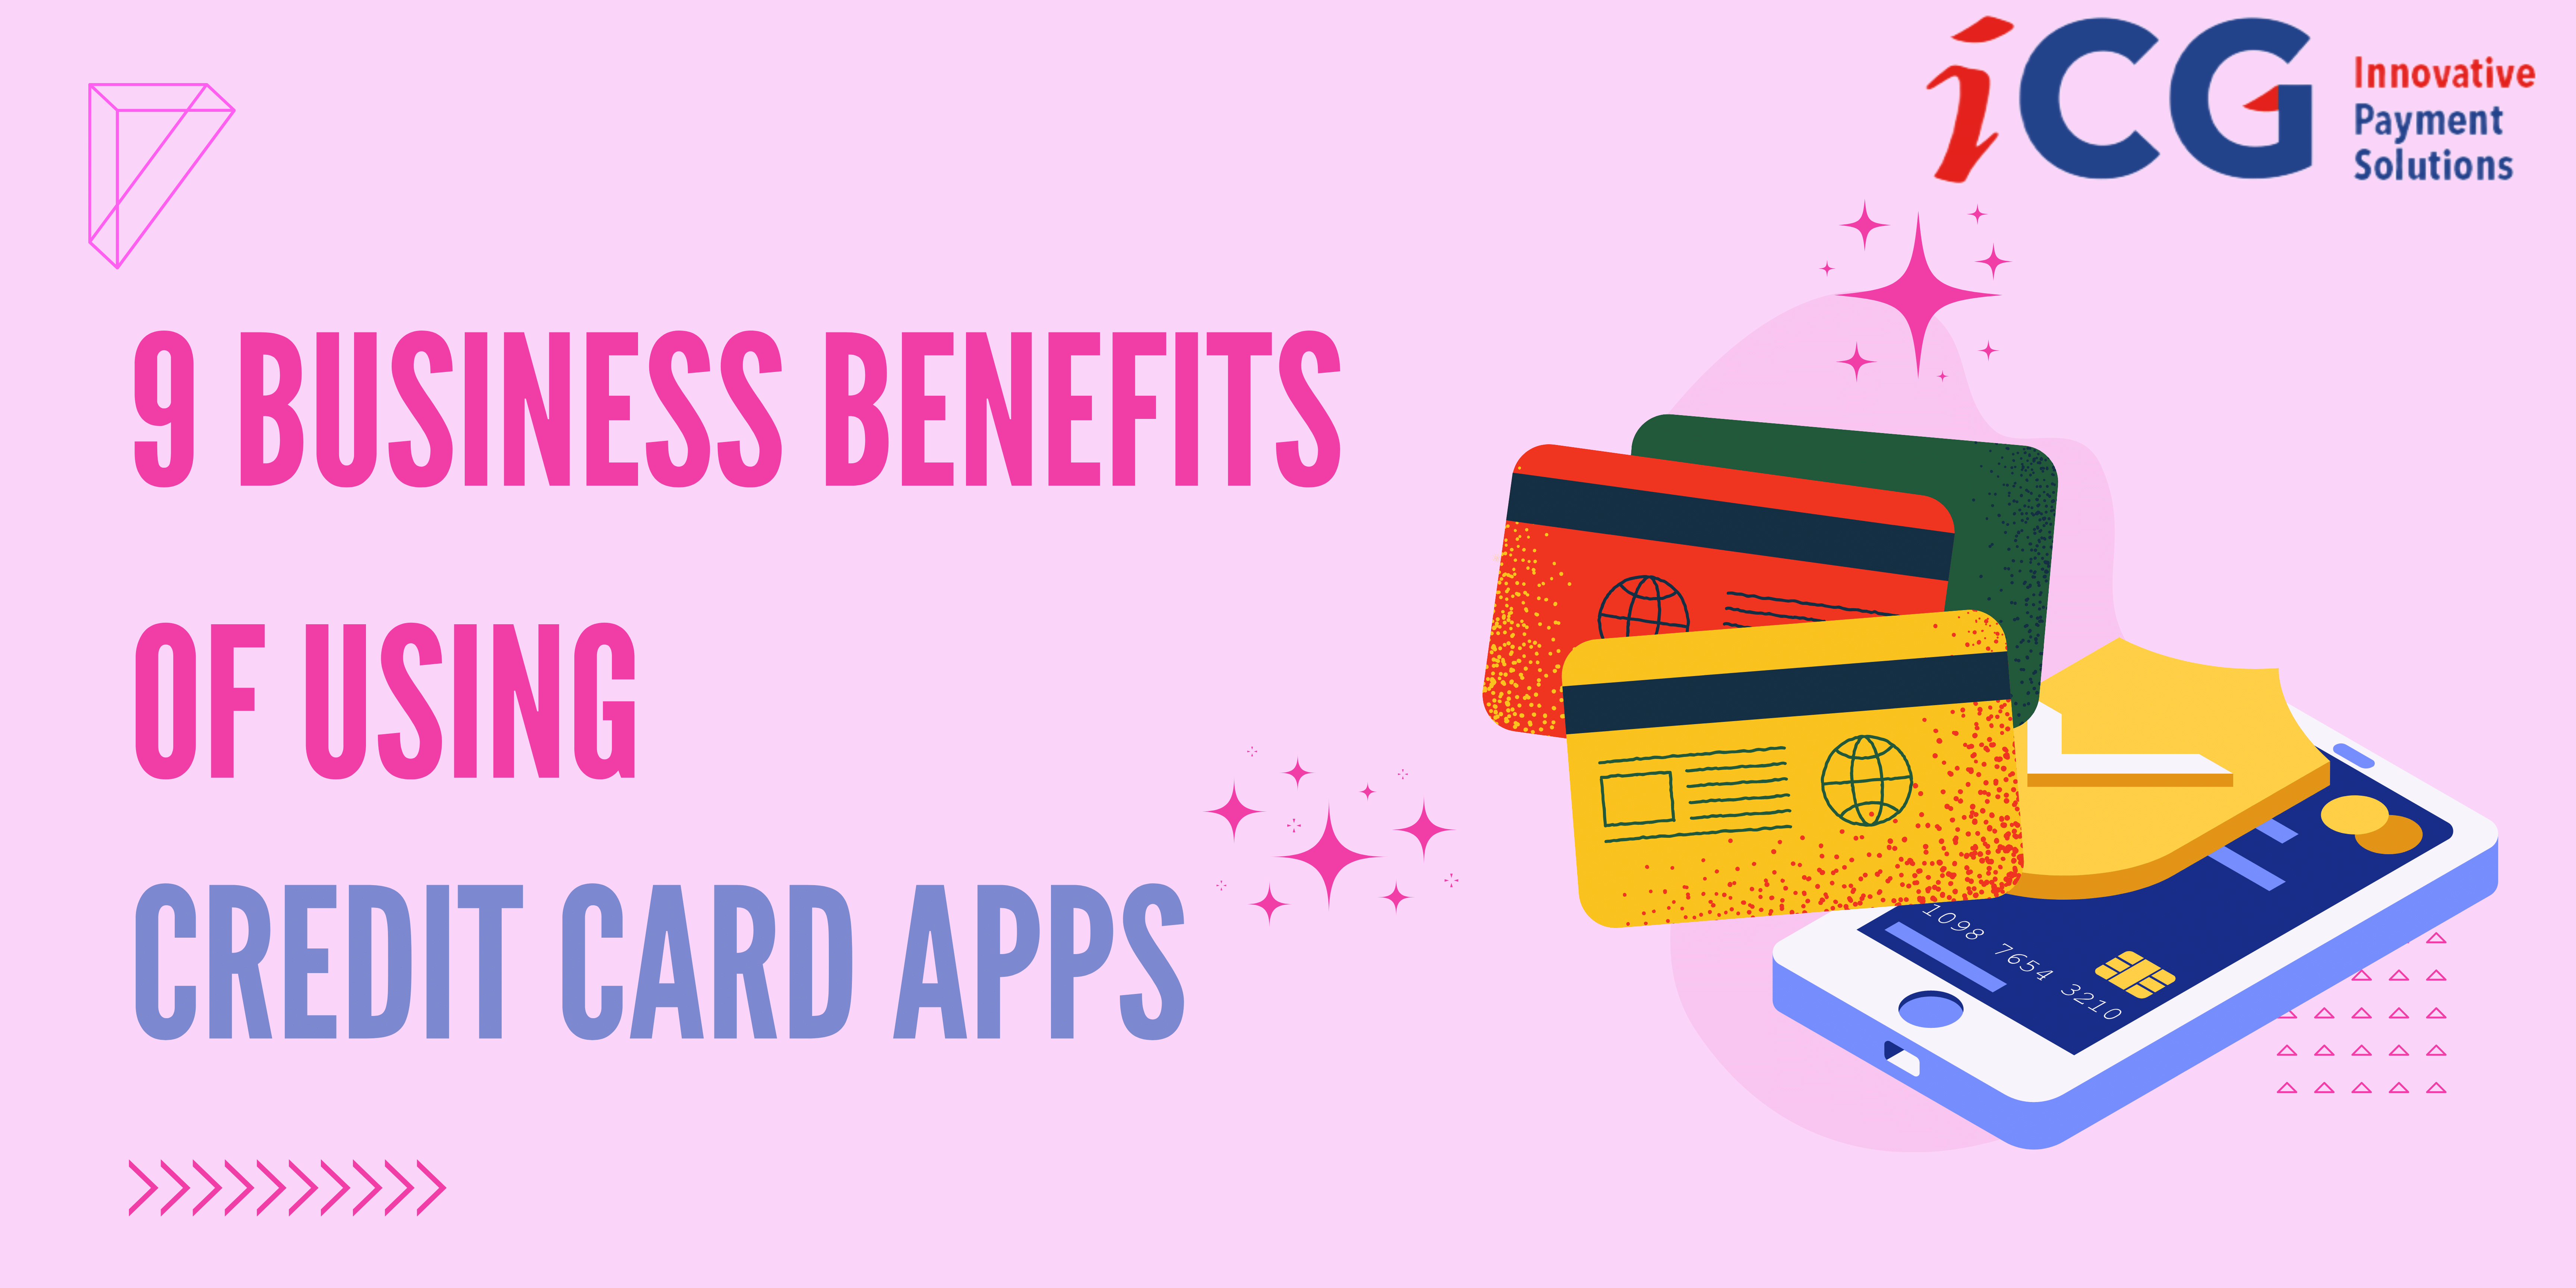 9 Business Benefits of Using Credit Card Apps